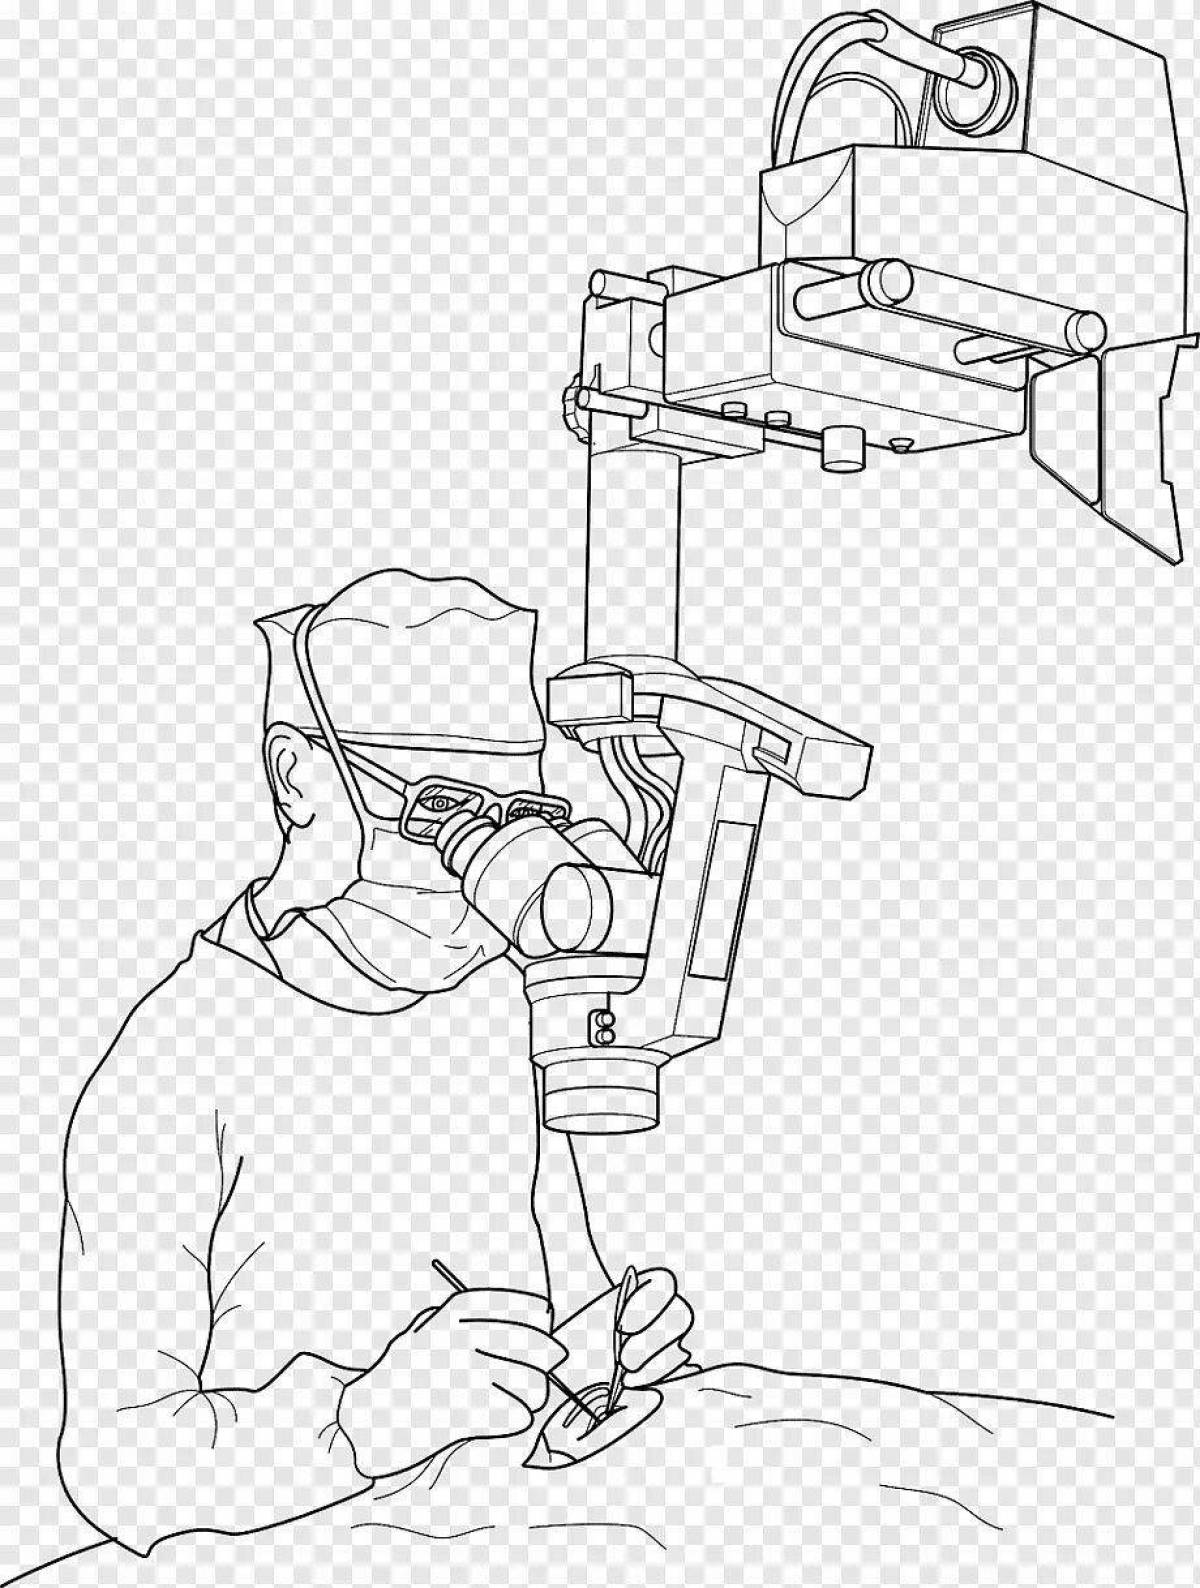 Creative surgery coloring page